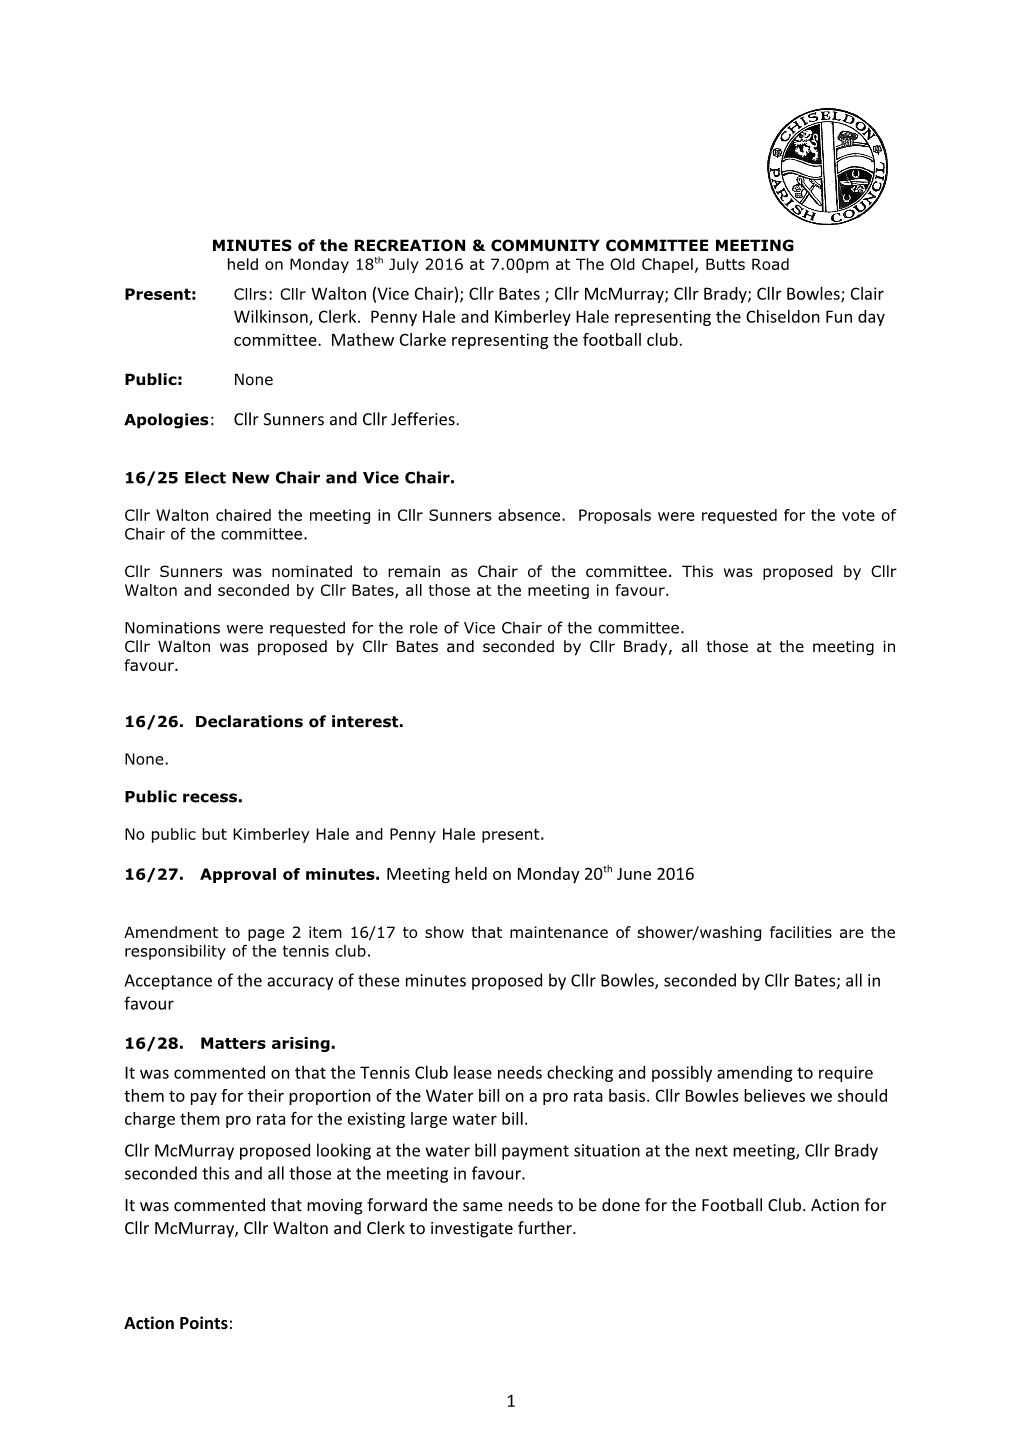 MINUTES of the RECREATION & COMMUNITY COMMITTEE MEETING